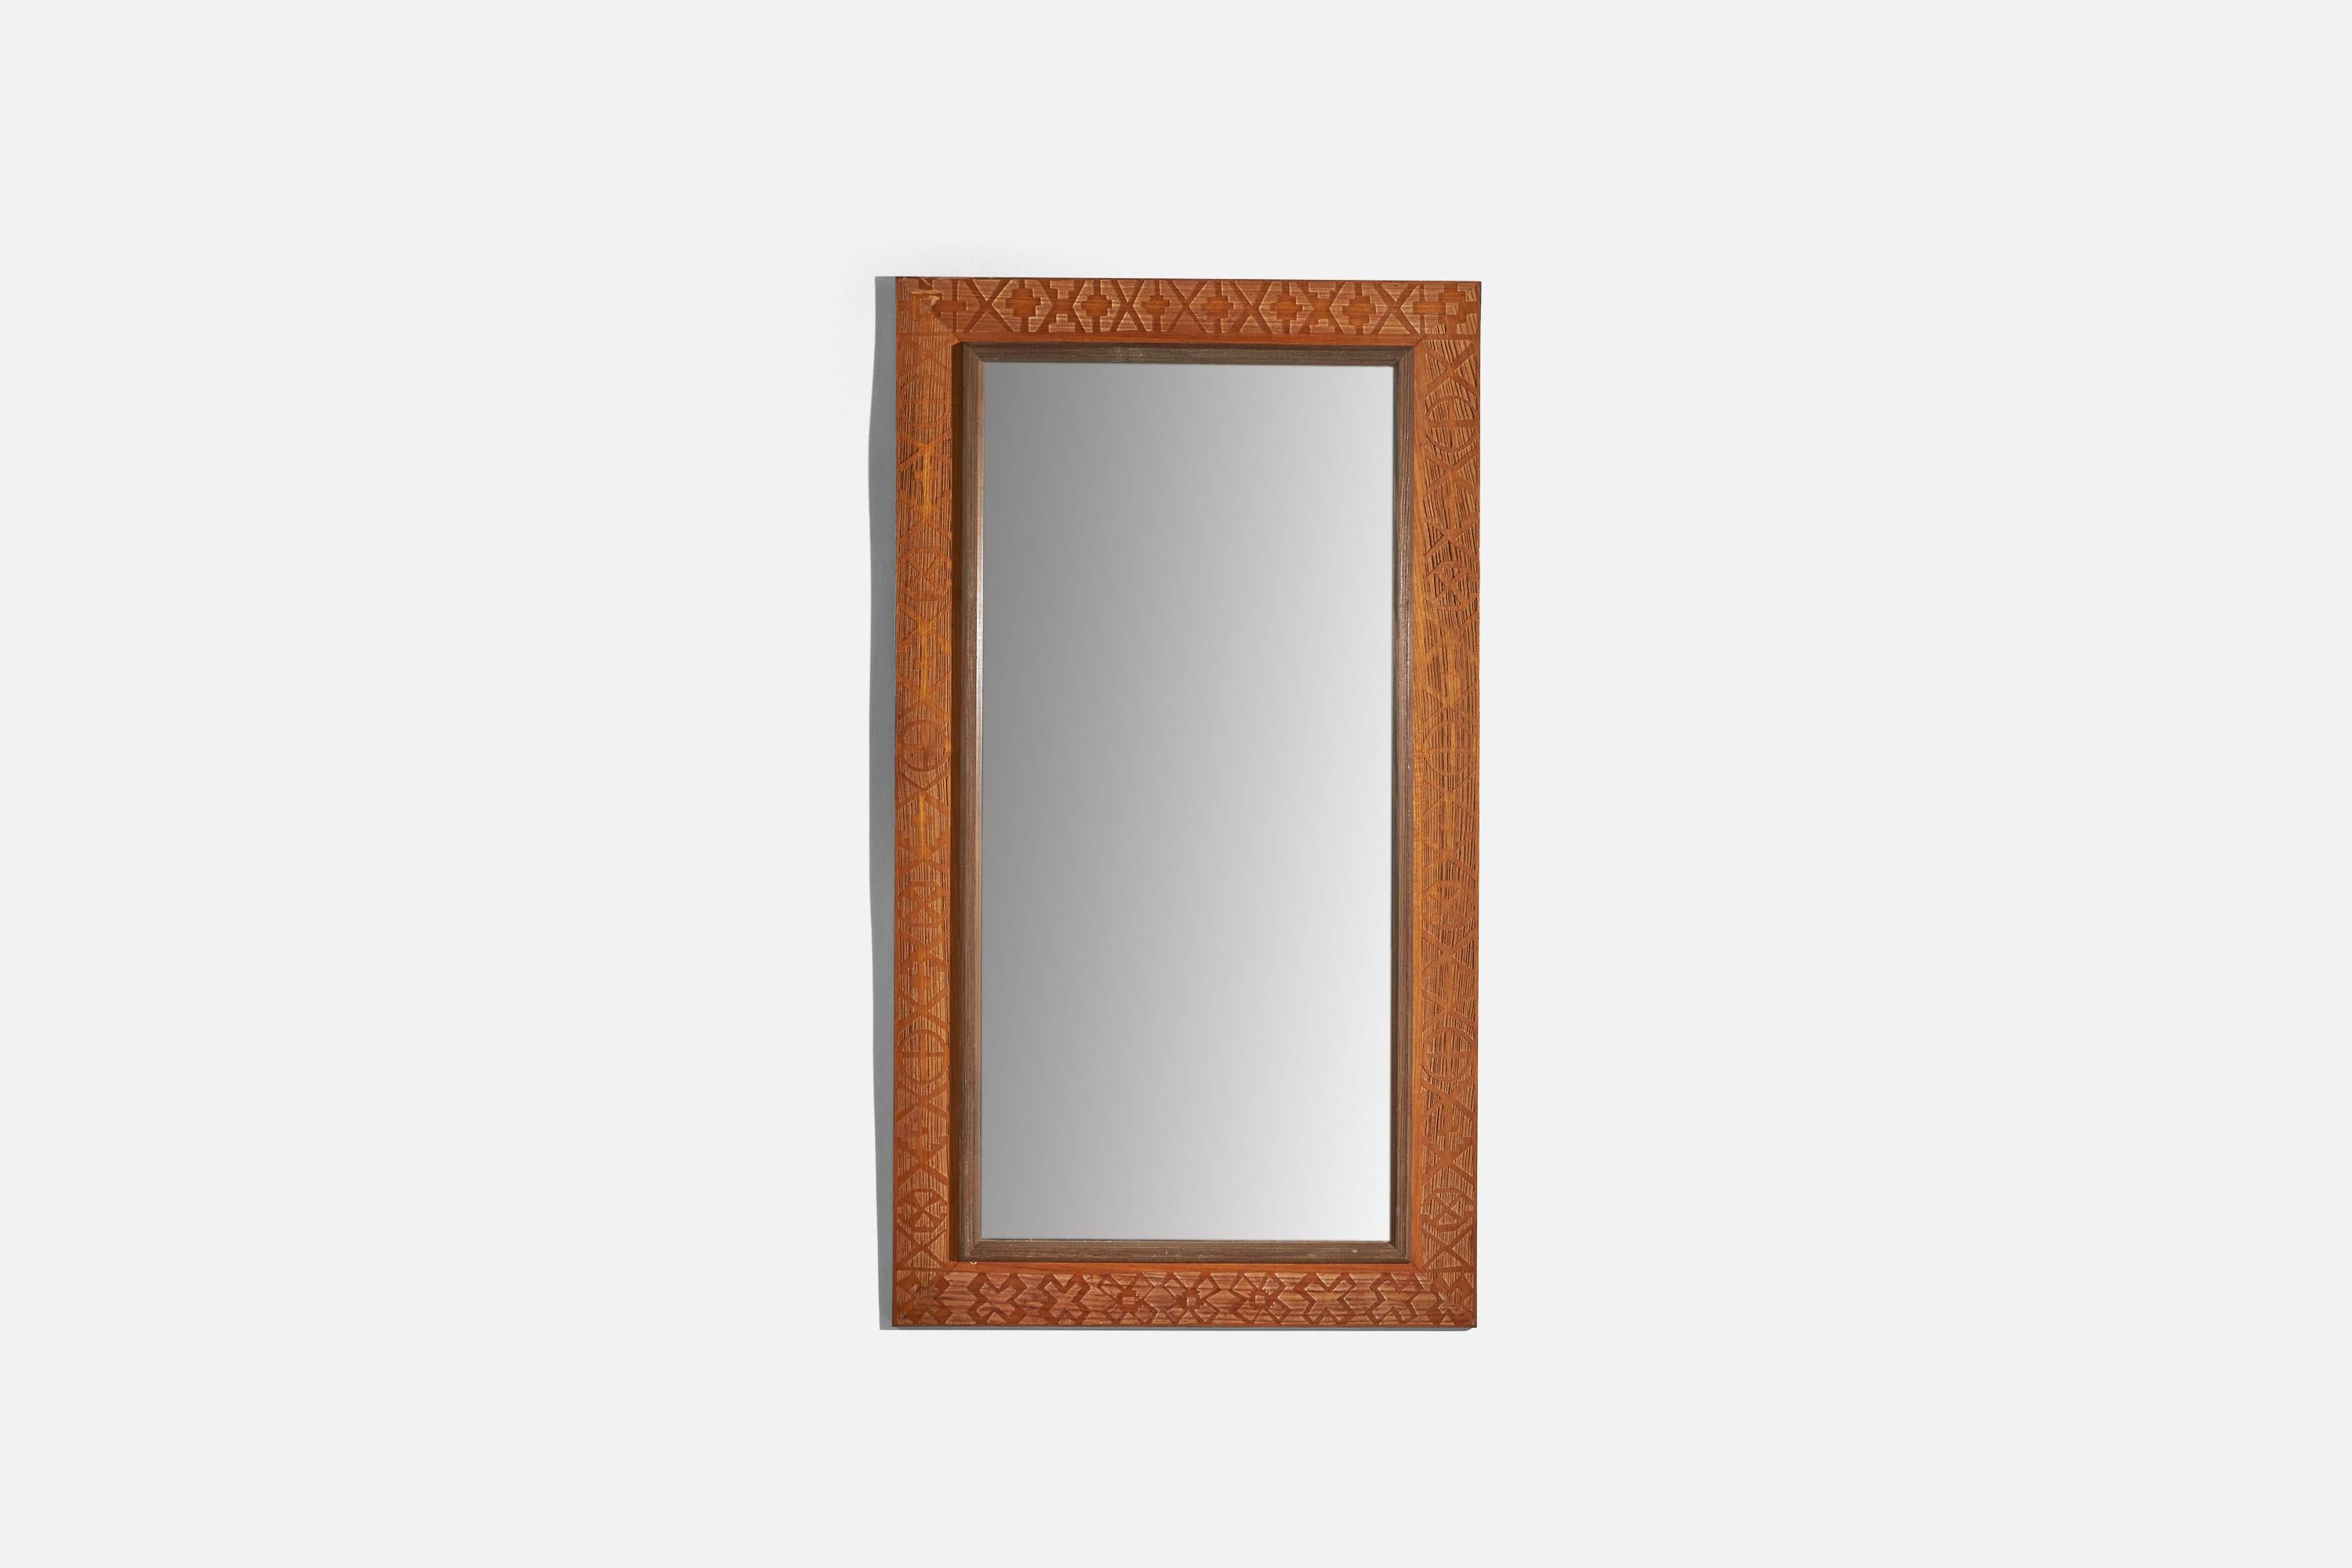 A carved wooden wall mirror designed and produced in Italy, c. 1930s.
 